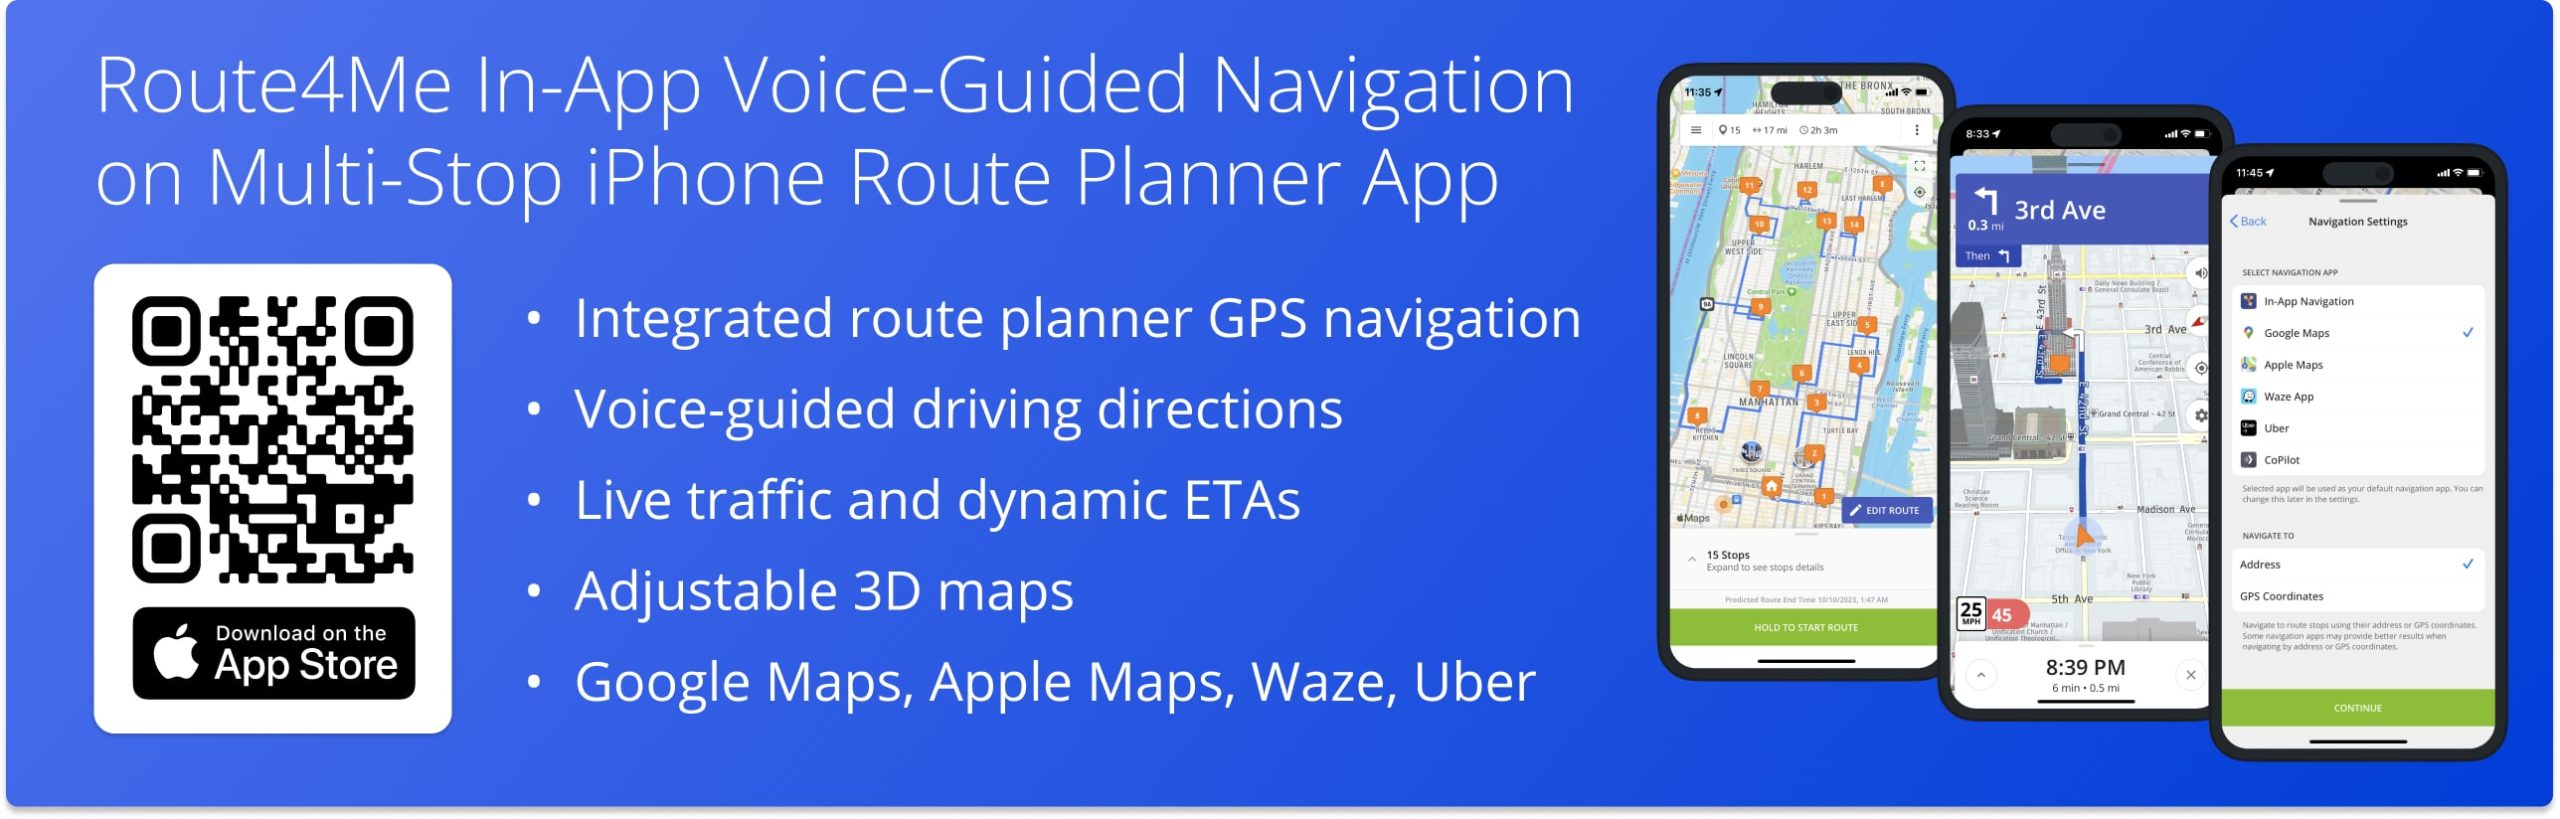 iPhone Route Planner app integrated voice-guided GPS navigation with live traffic, speed alerts, Google Maps, and Apple Maps.